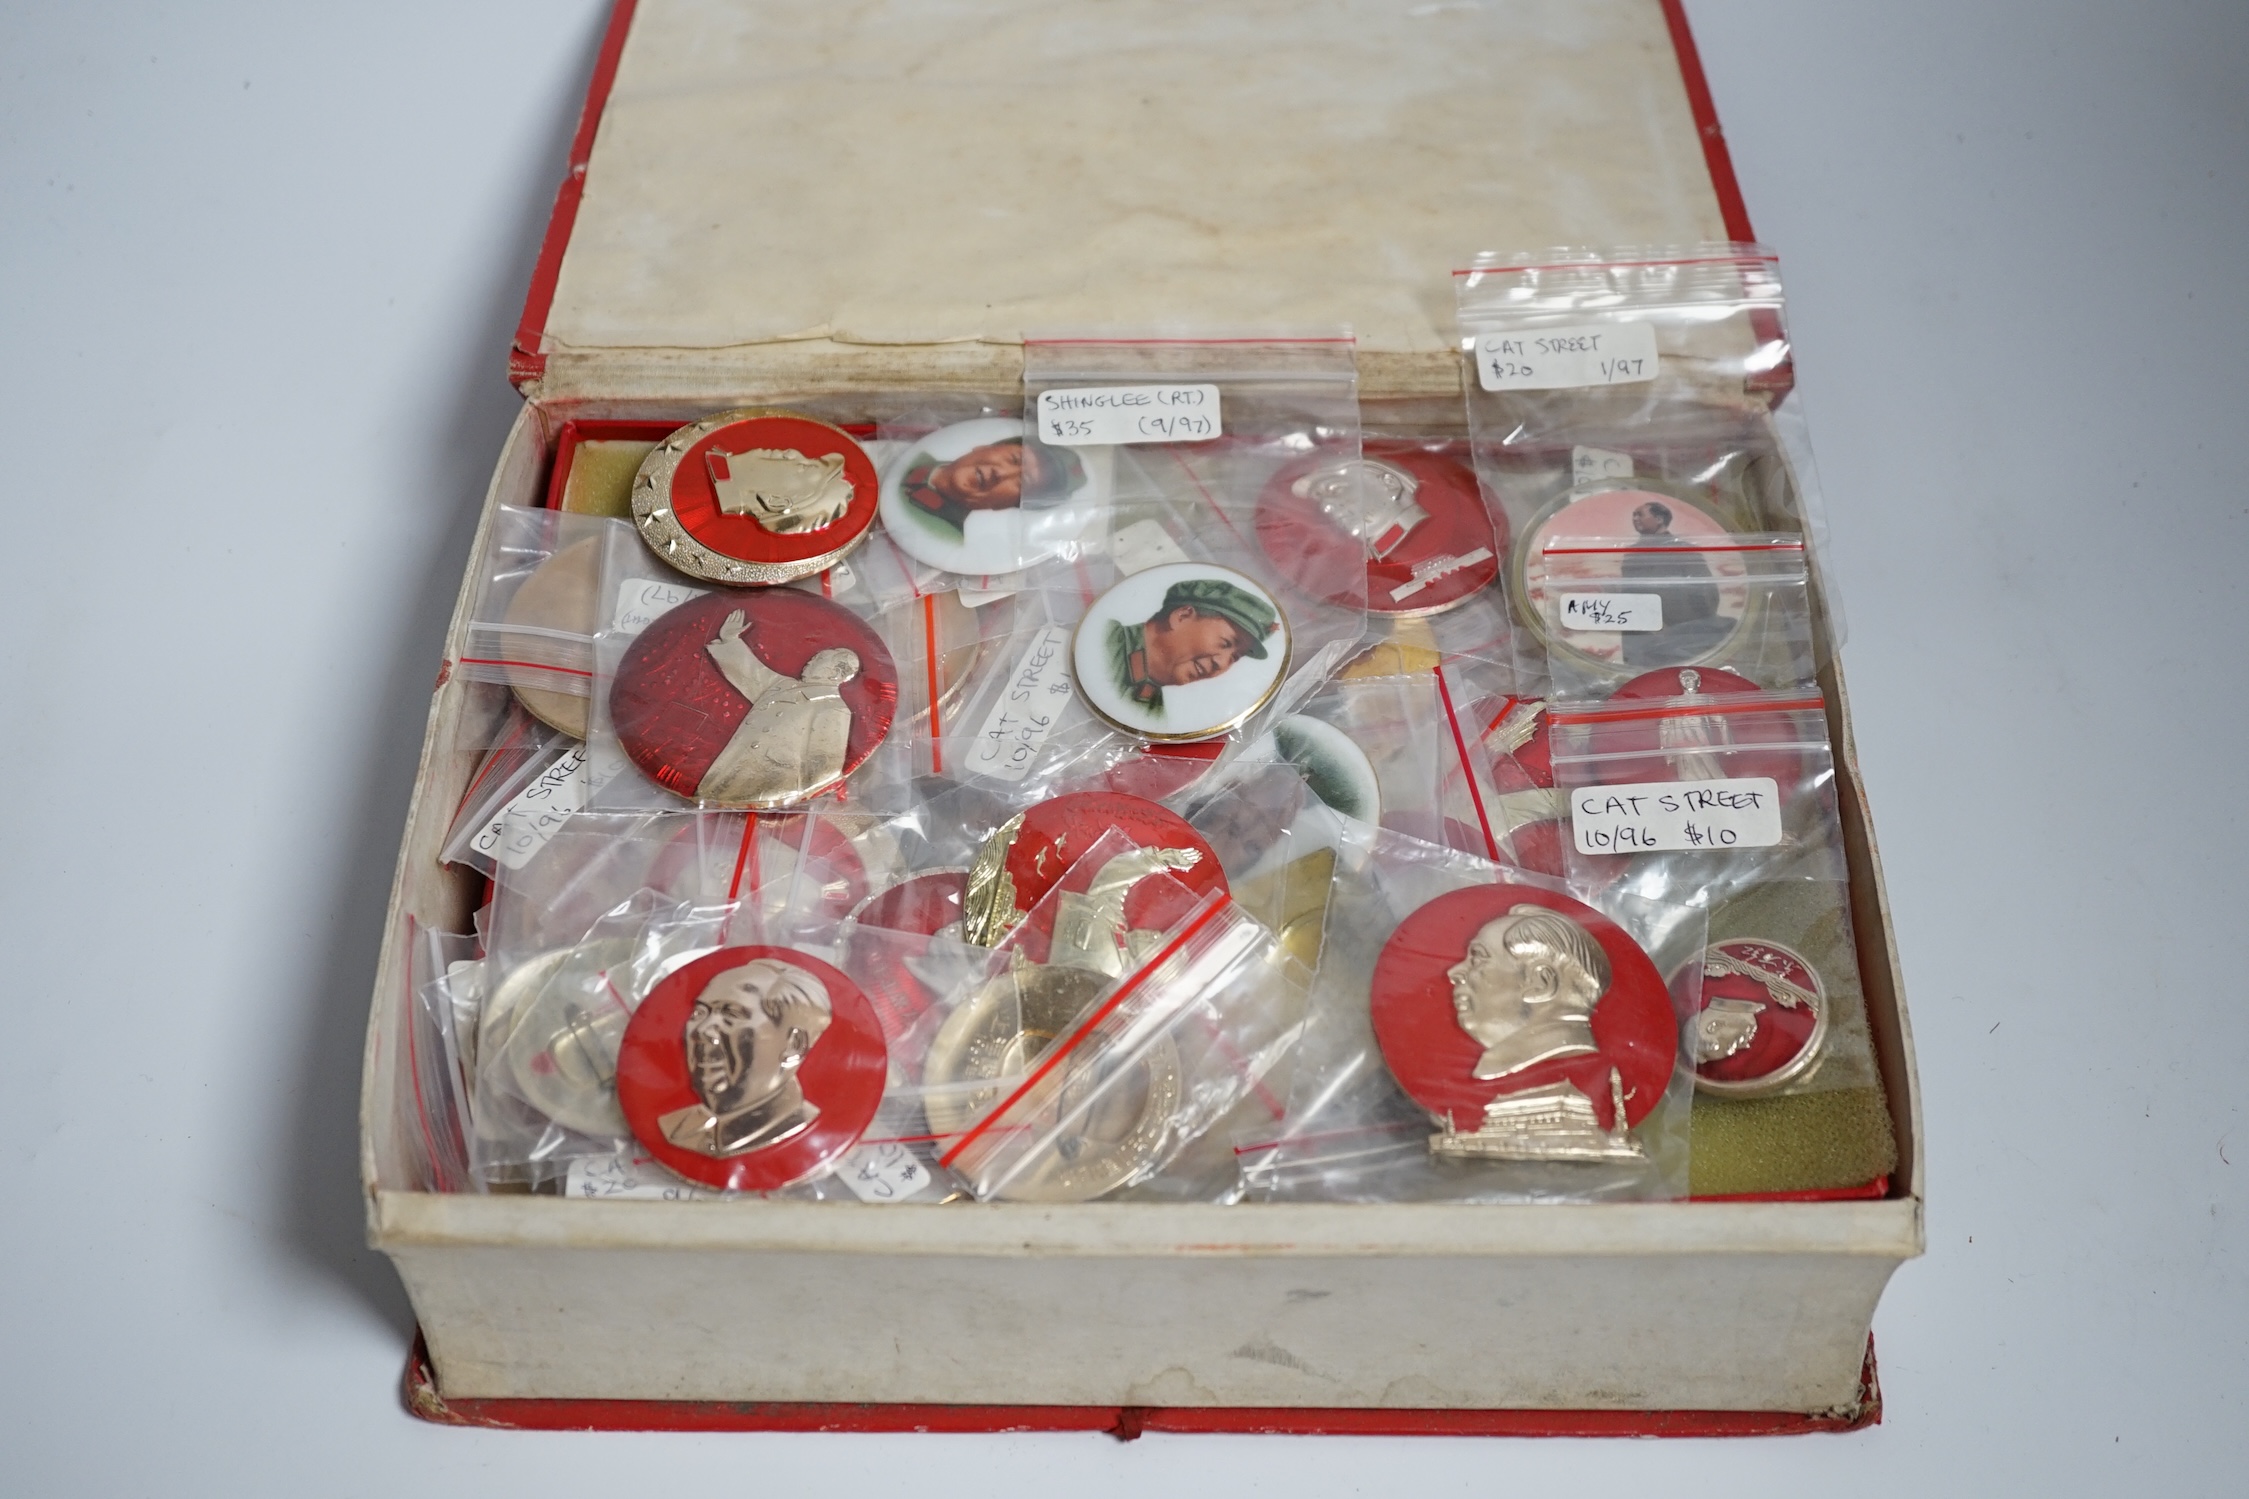 A collection of forty one Chinese Mao Zedong badges and a box - Image 2 of 3